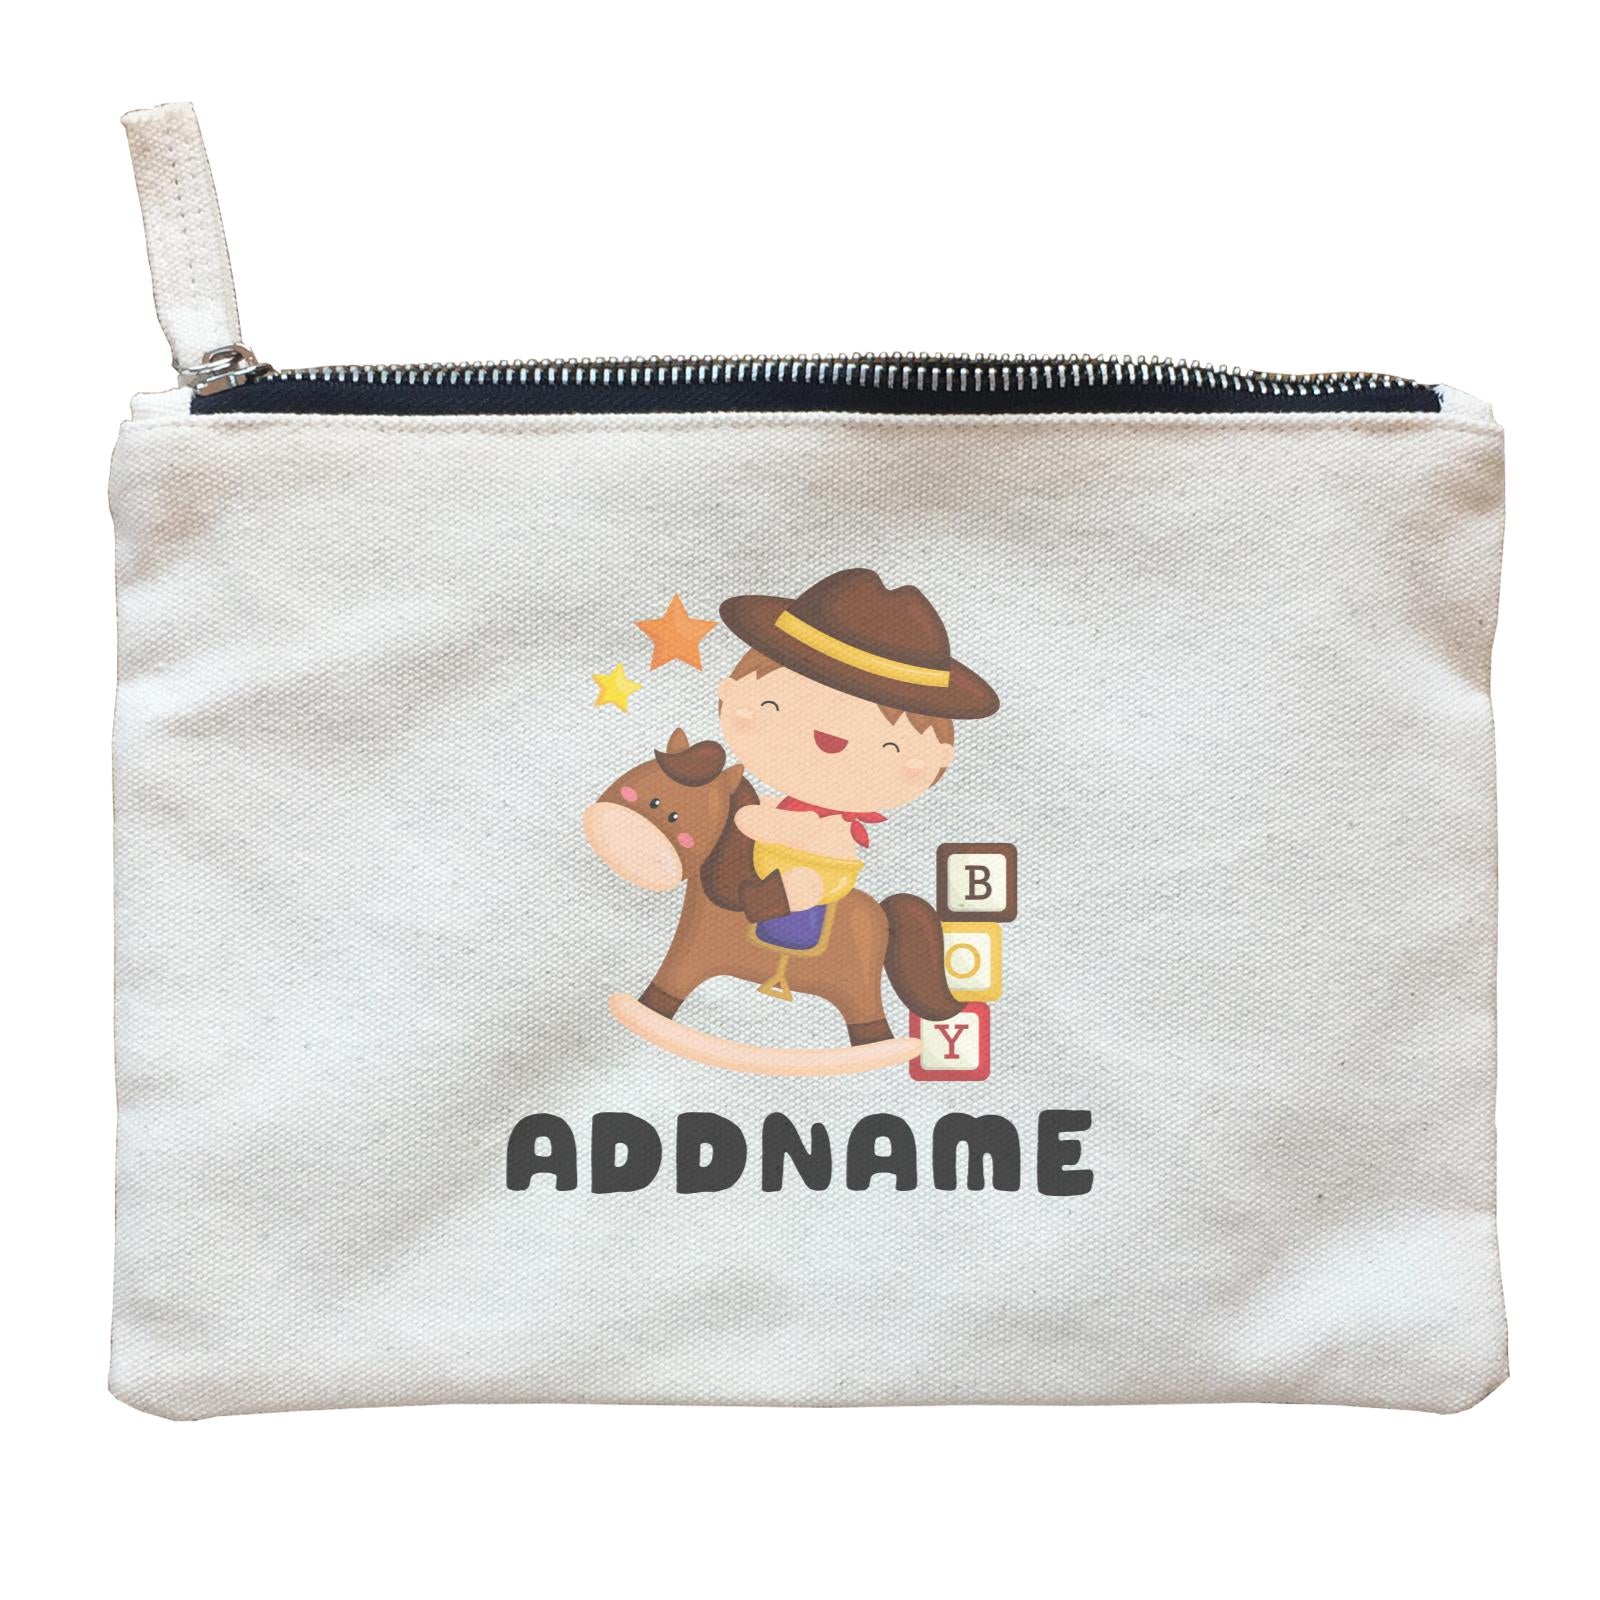 Birthday Cowboy Style Little Cowboy Playing Toy Horse Addname Zipper Pouch